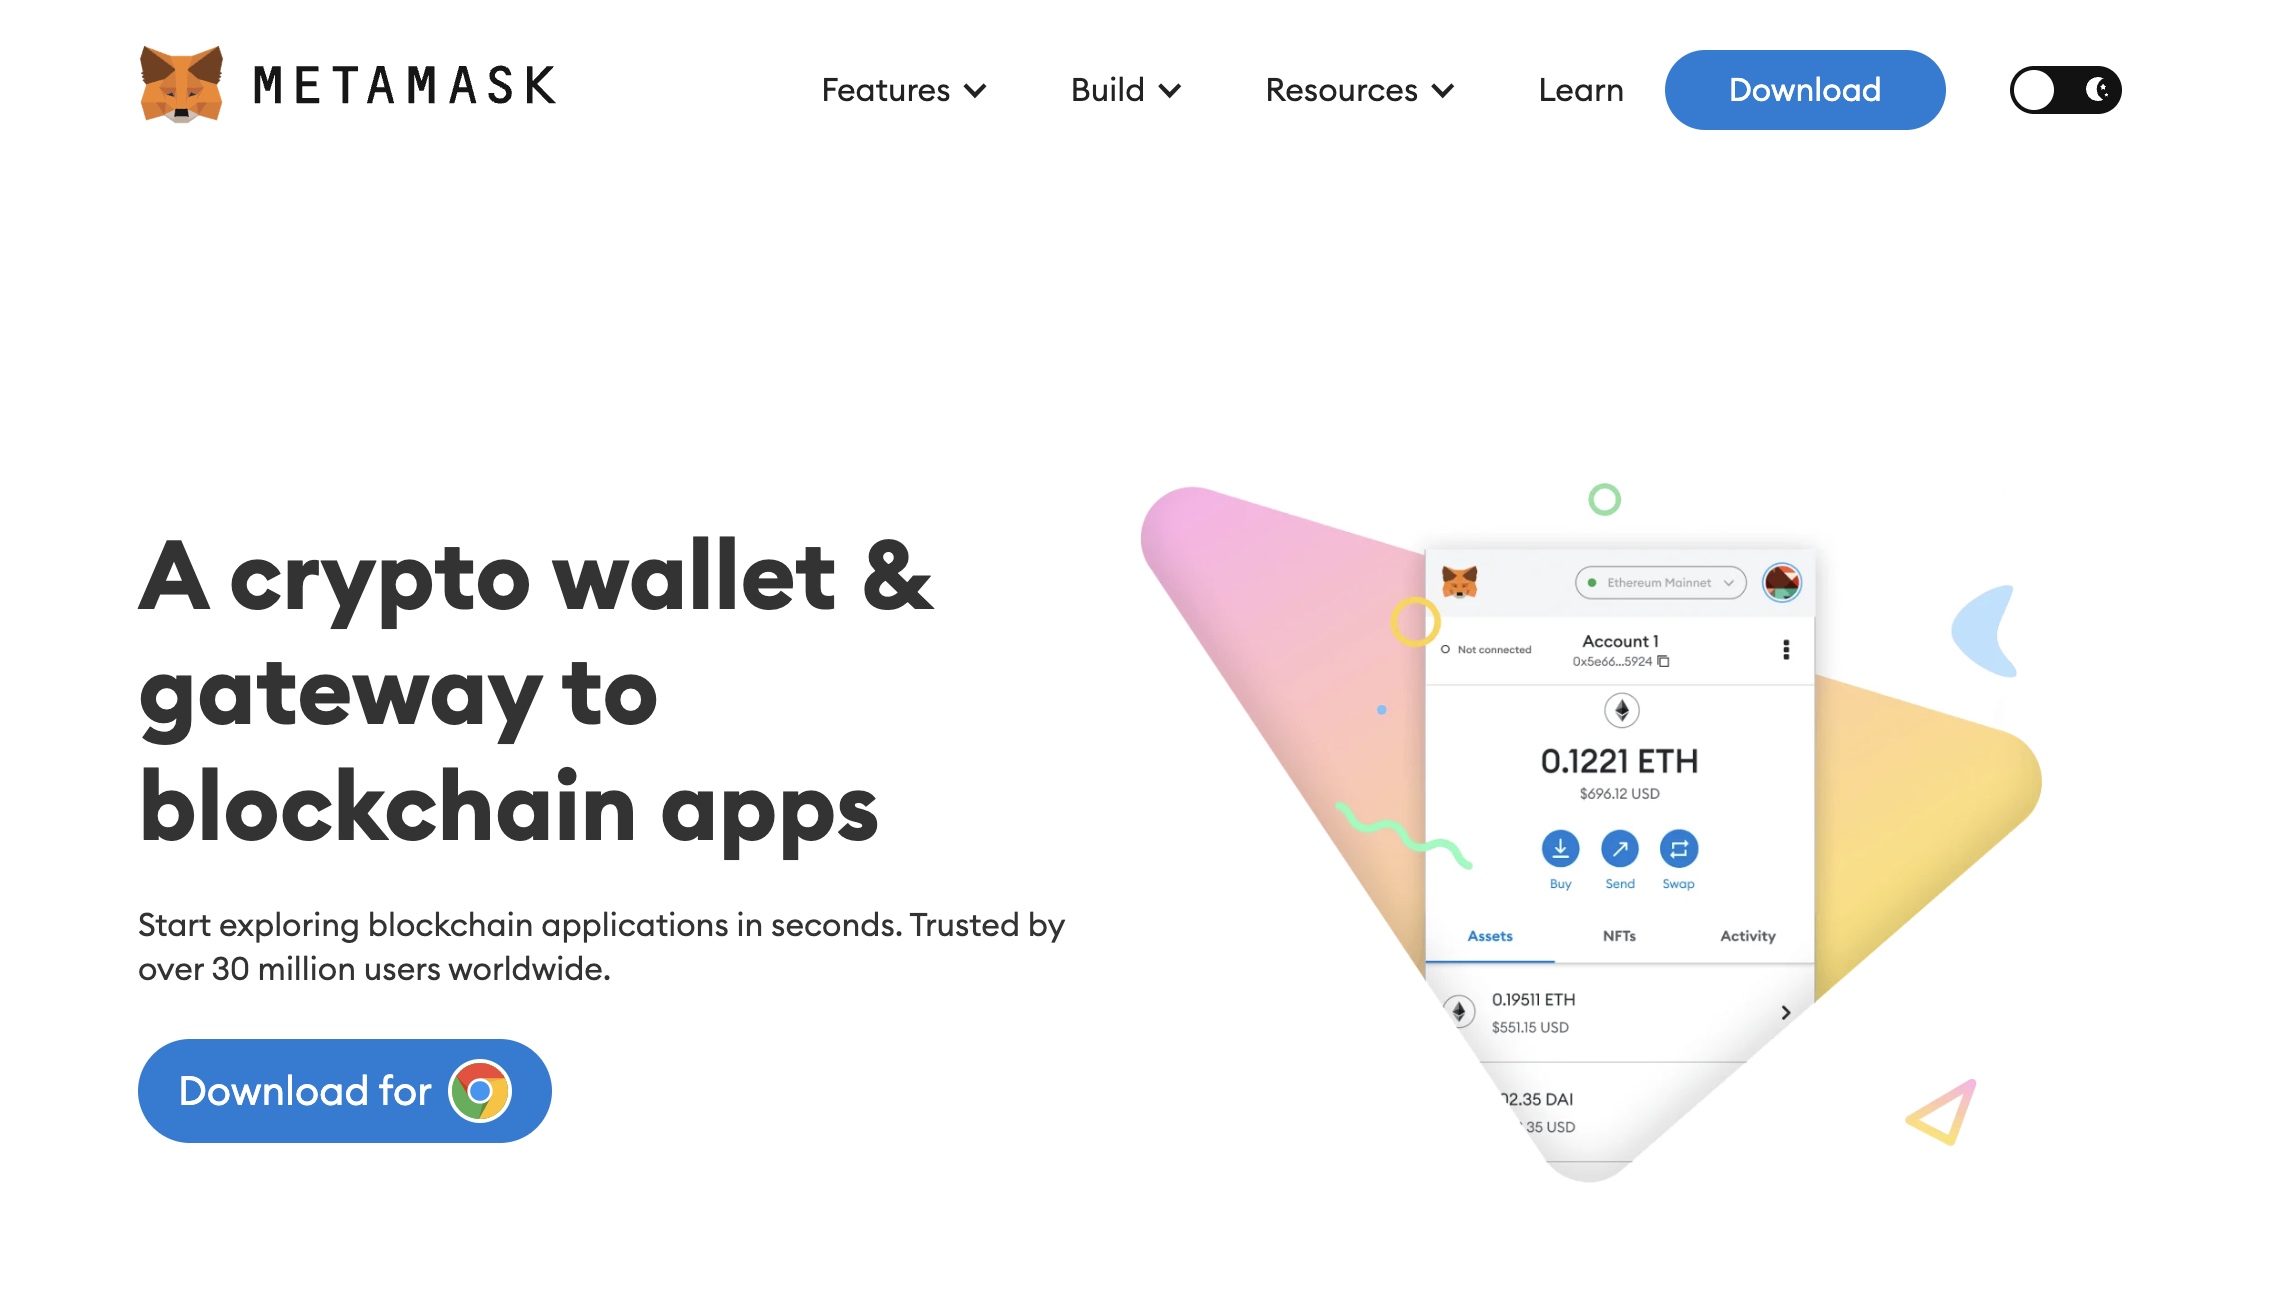 MetaMask-is-one-of-the-most-prominent-applications-for-creating-crypto-wallets.